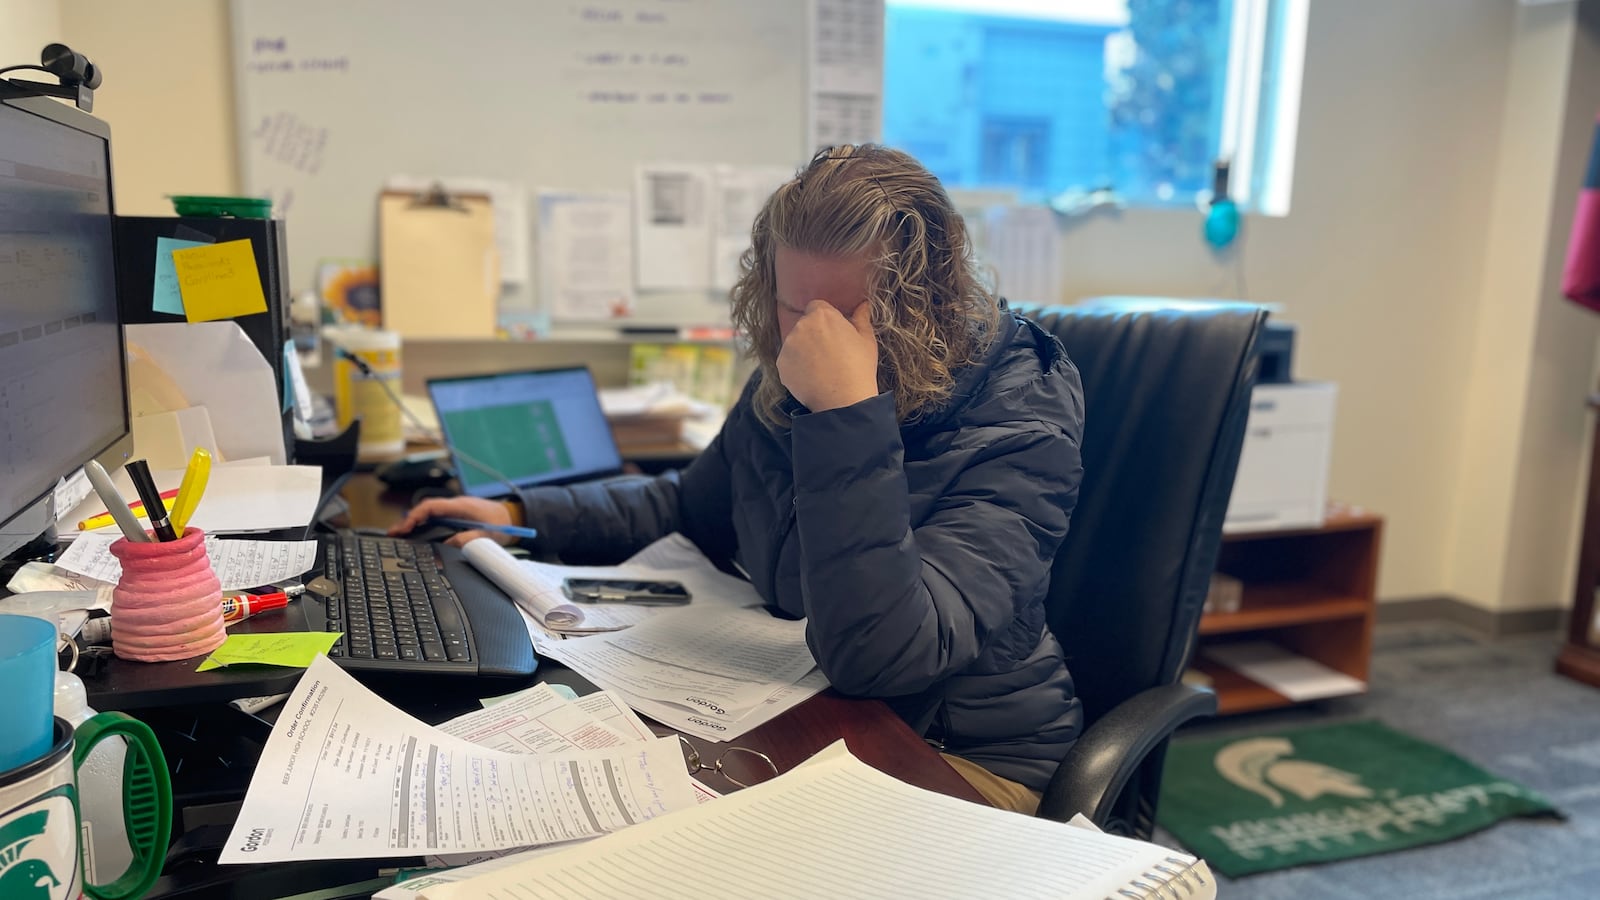 A nutrition services supervisor places her hand over her face in exasperation behind a desk piled with notebooks and paper.